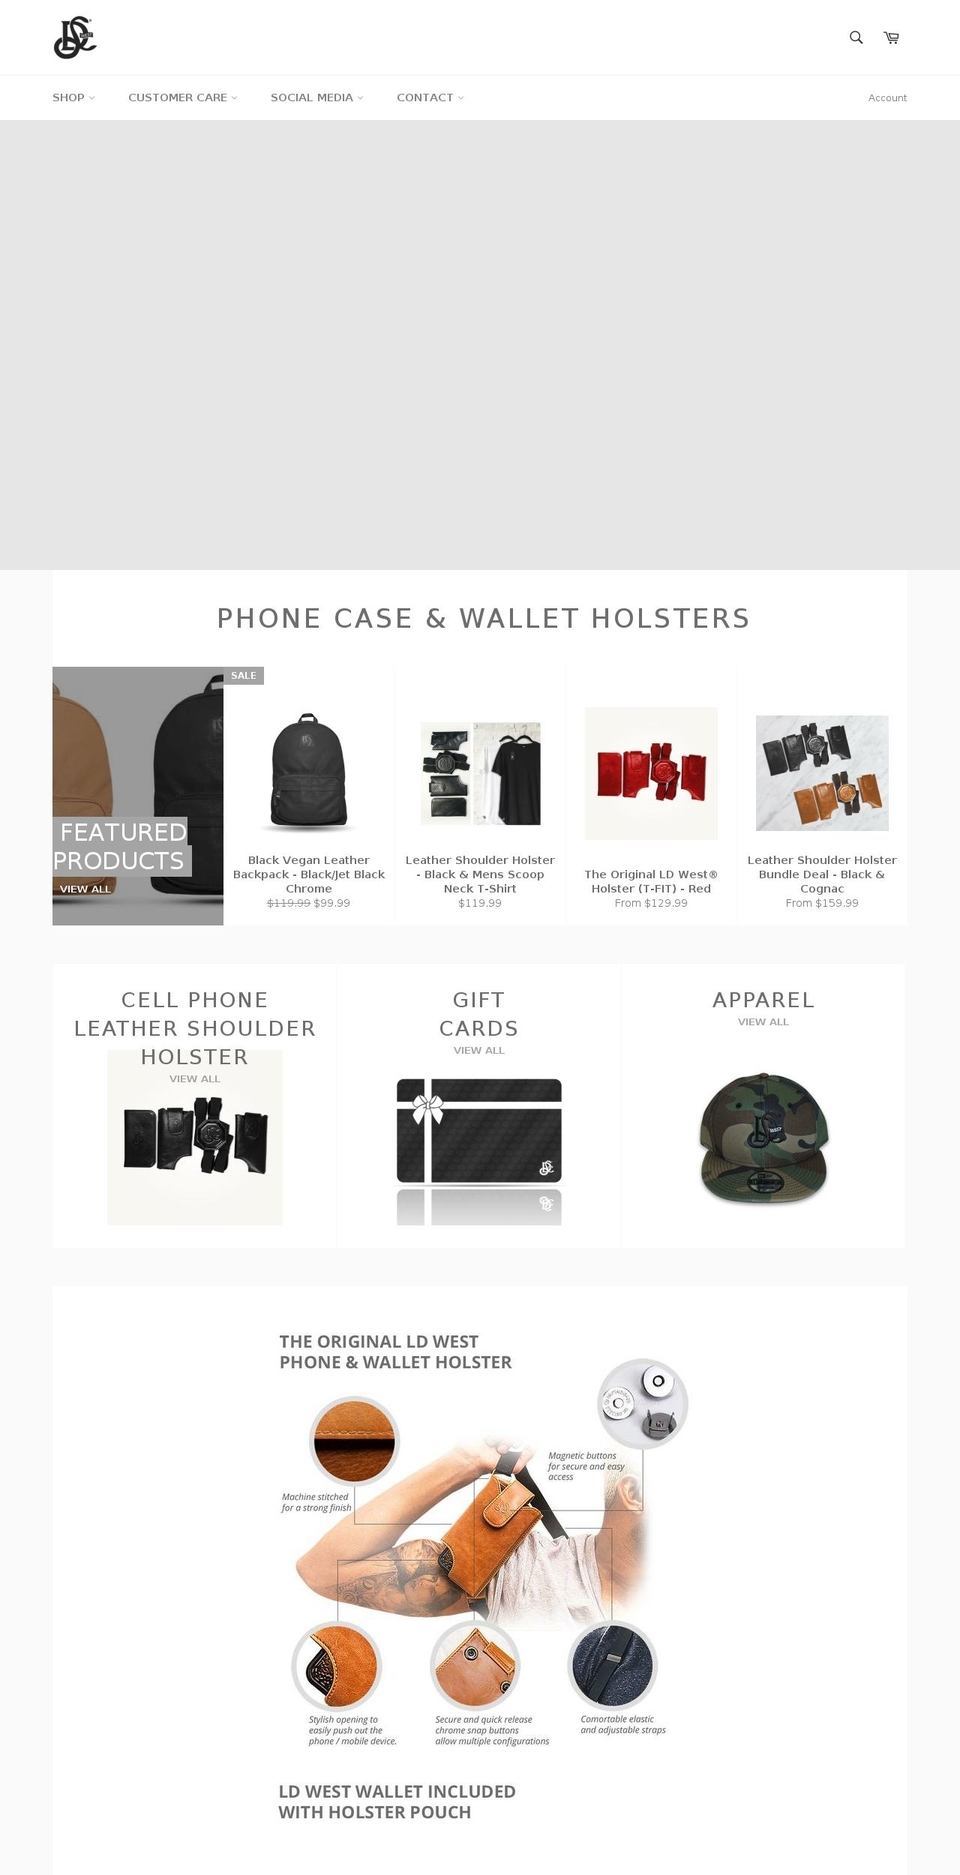 Ira Shopify theme site example ldwest.com